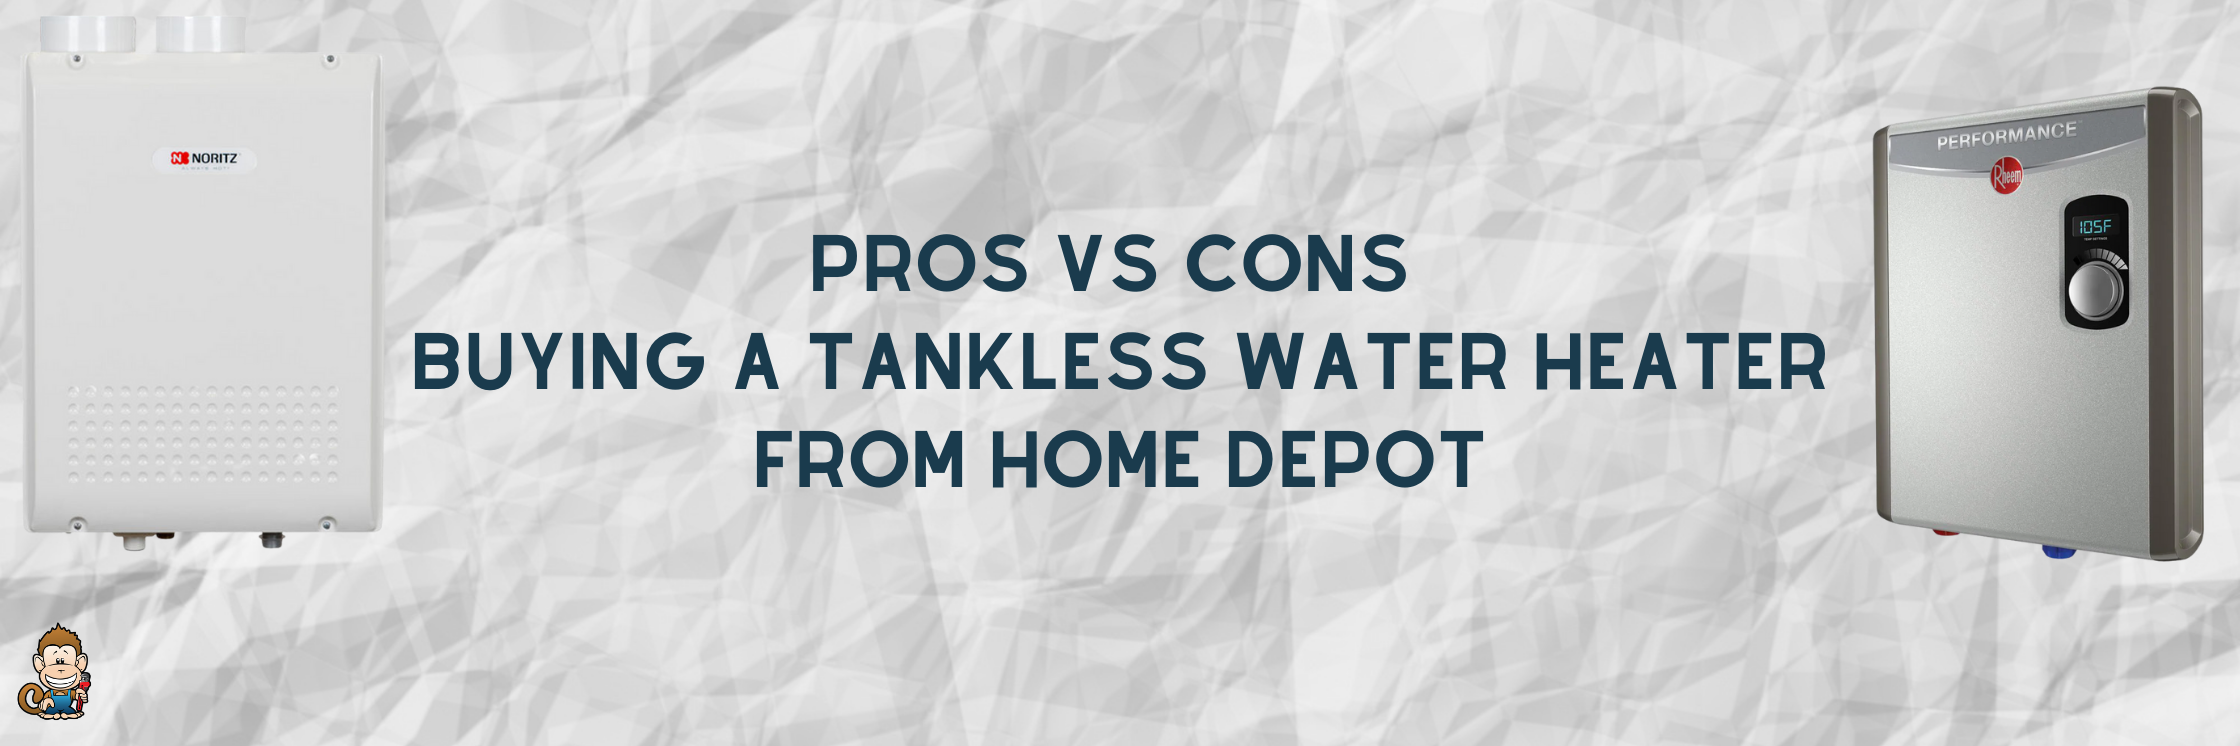 Pros vs Cons of Buying a Tankless Water Heater from Home Depot